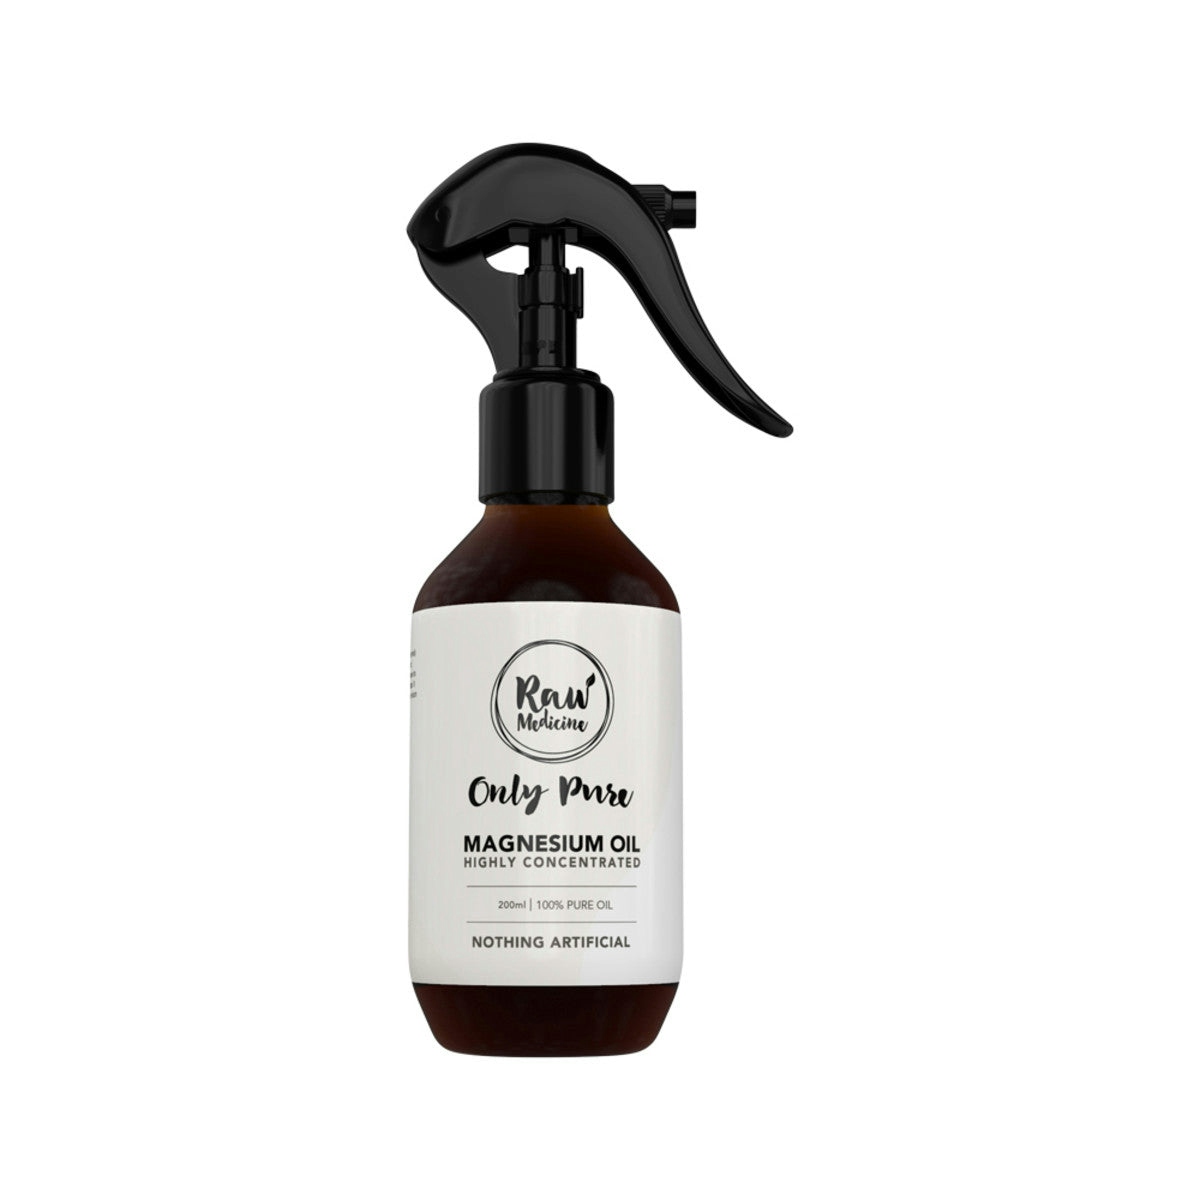 image of Raw Medicine Magnesium Oil (Highly Concentrated) Only Pure Spray 200ml on white background